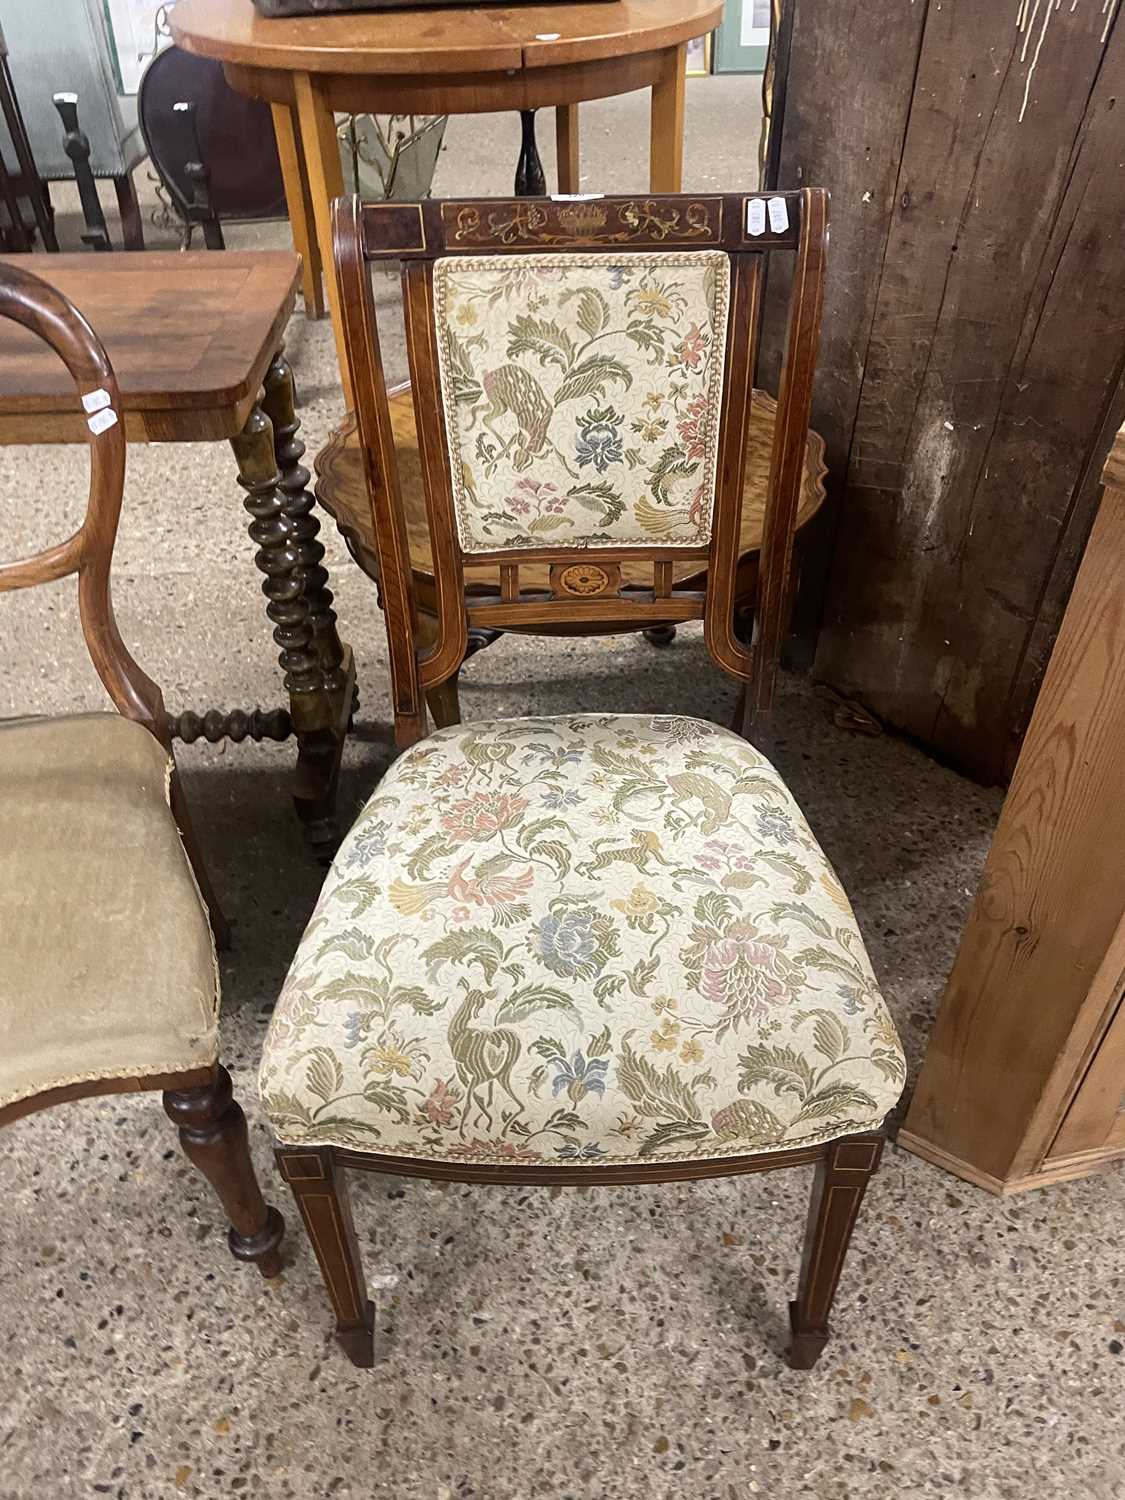 Edwardian inlaid bedroom chair with floral upholstery